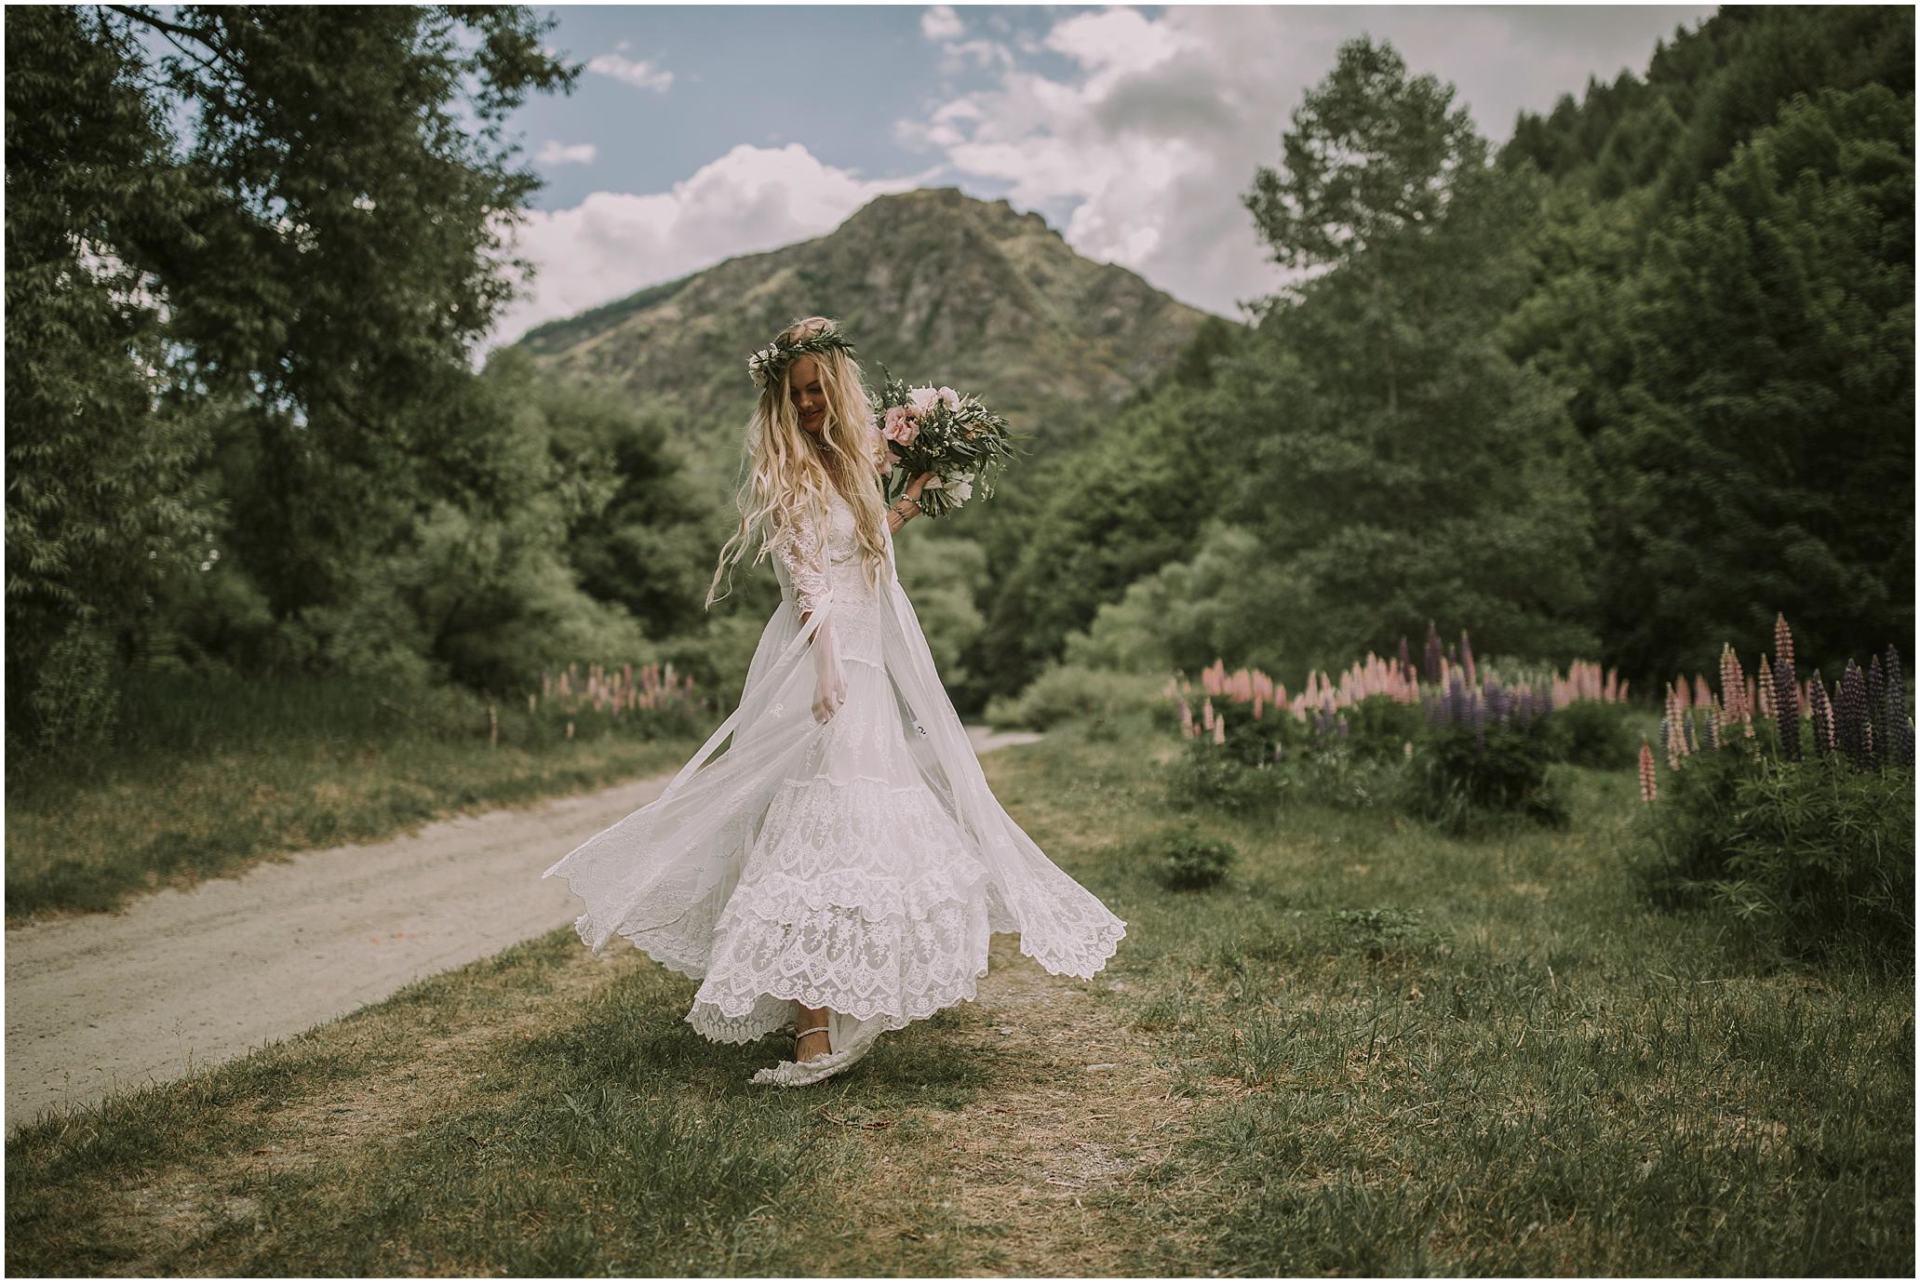 Charlotte Kiri Photography - Wedding Photography of a bride spinning around in her gorgeous bohemian lace dress, with purple and pink lupins lining a dirt road, leading to a picturesque mountain behind, in Arrowtown, New Zealand.